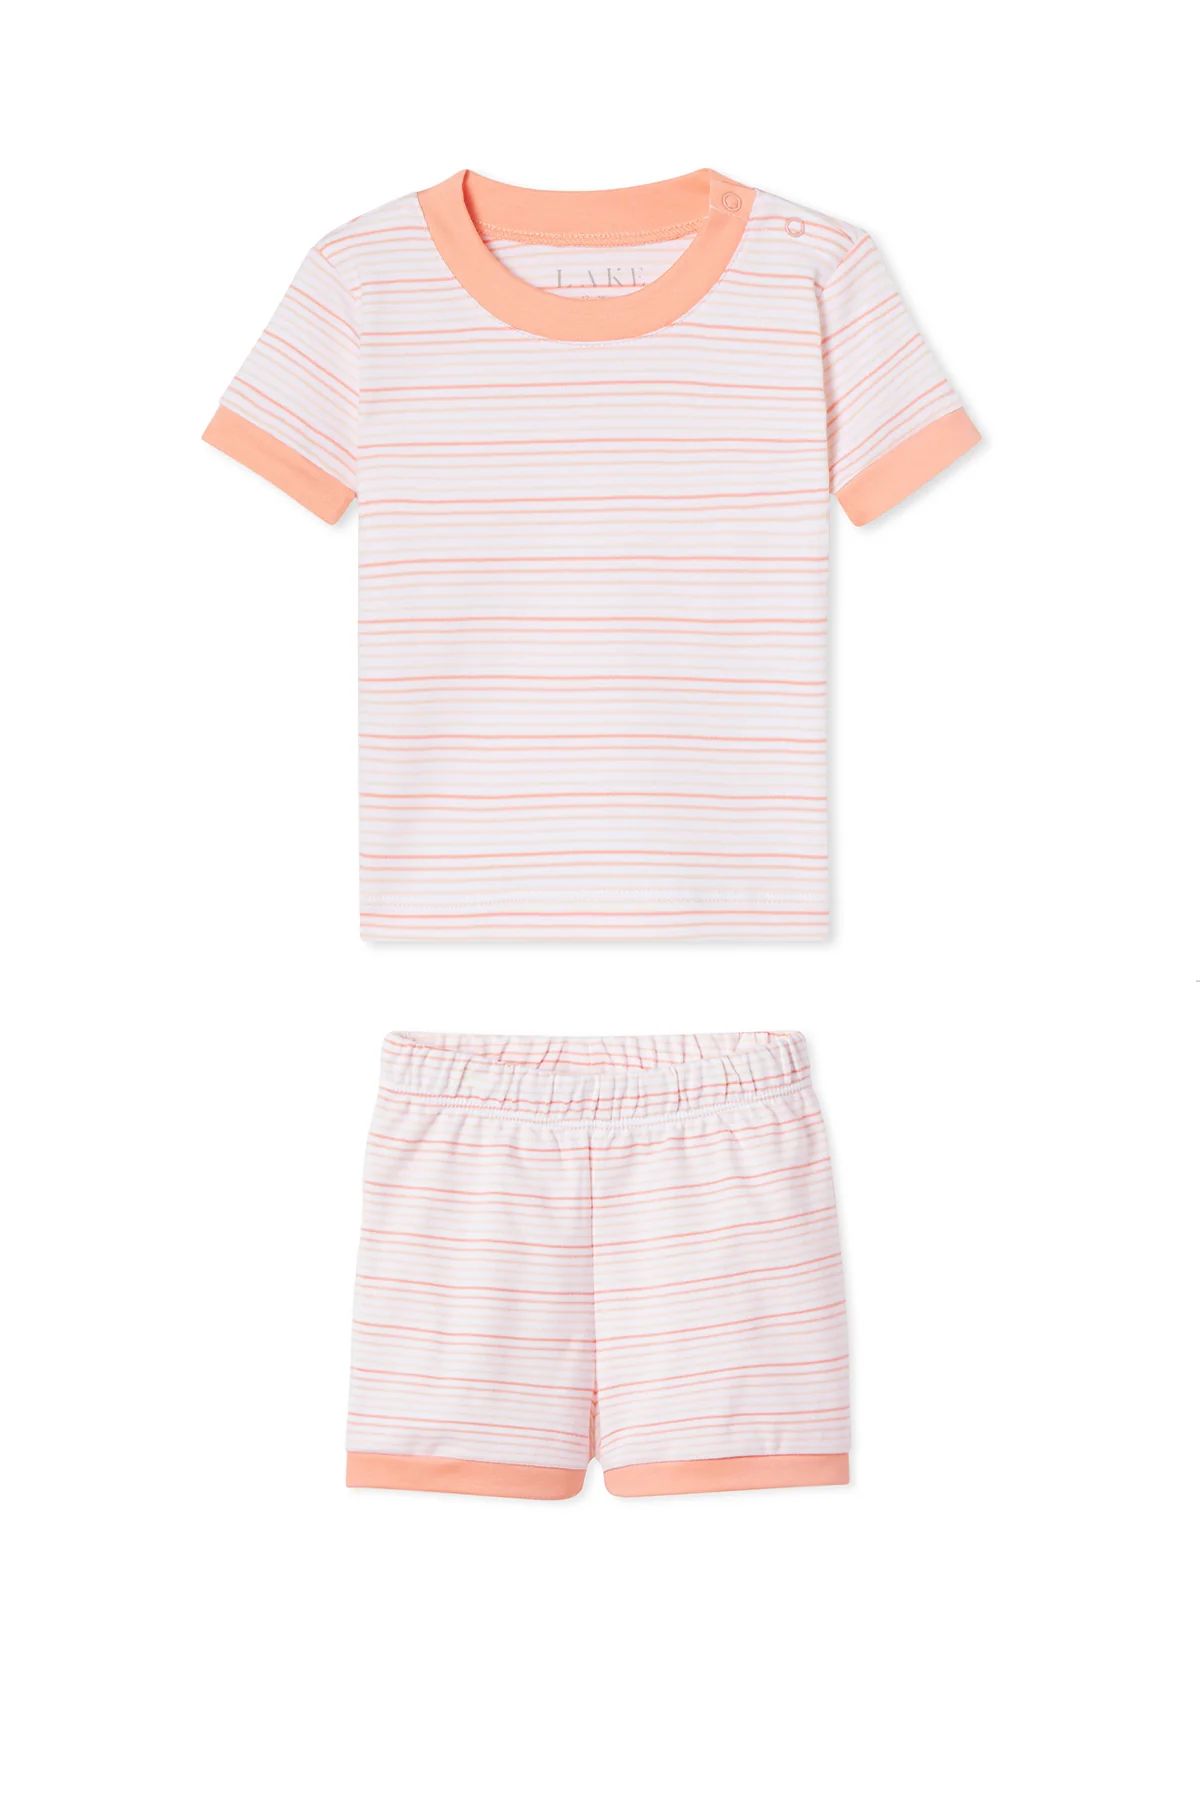 Baby Shorts Set in Bellini Ombre | Lake Pajamas